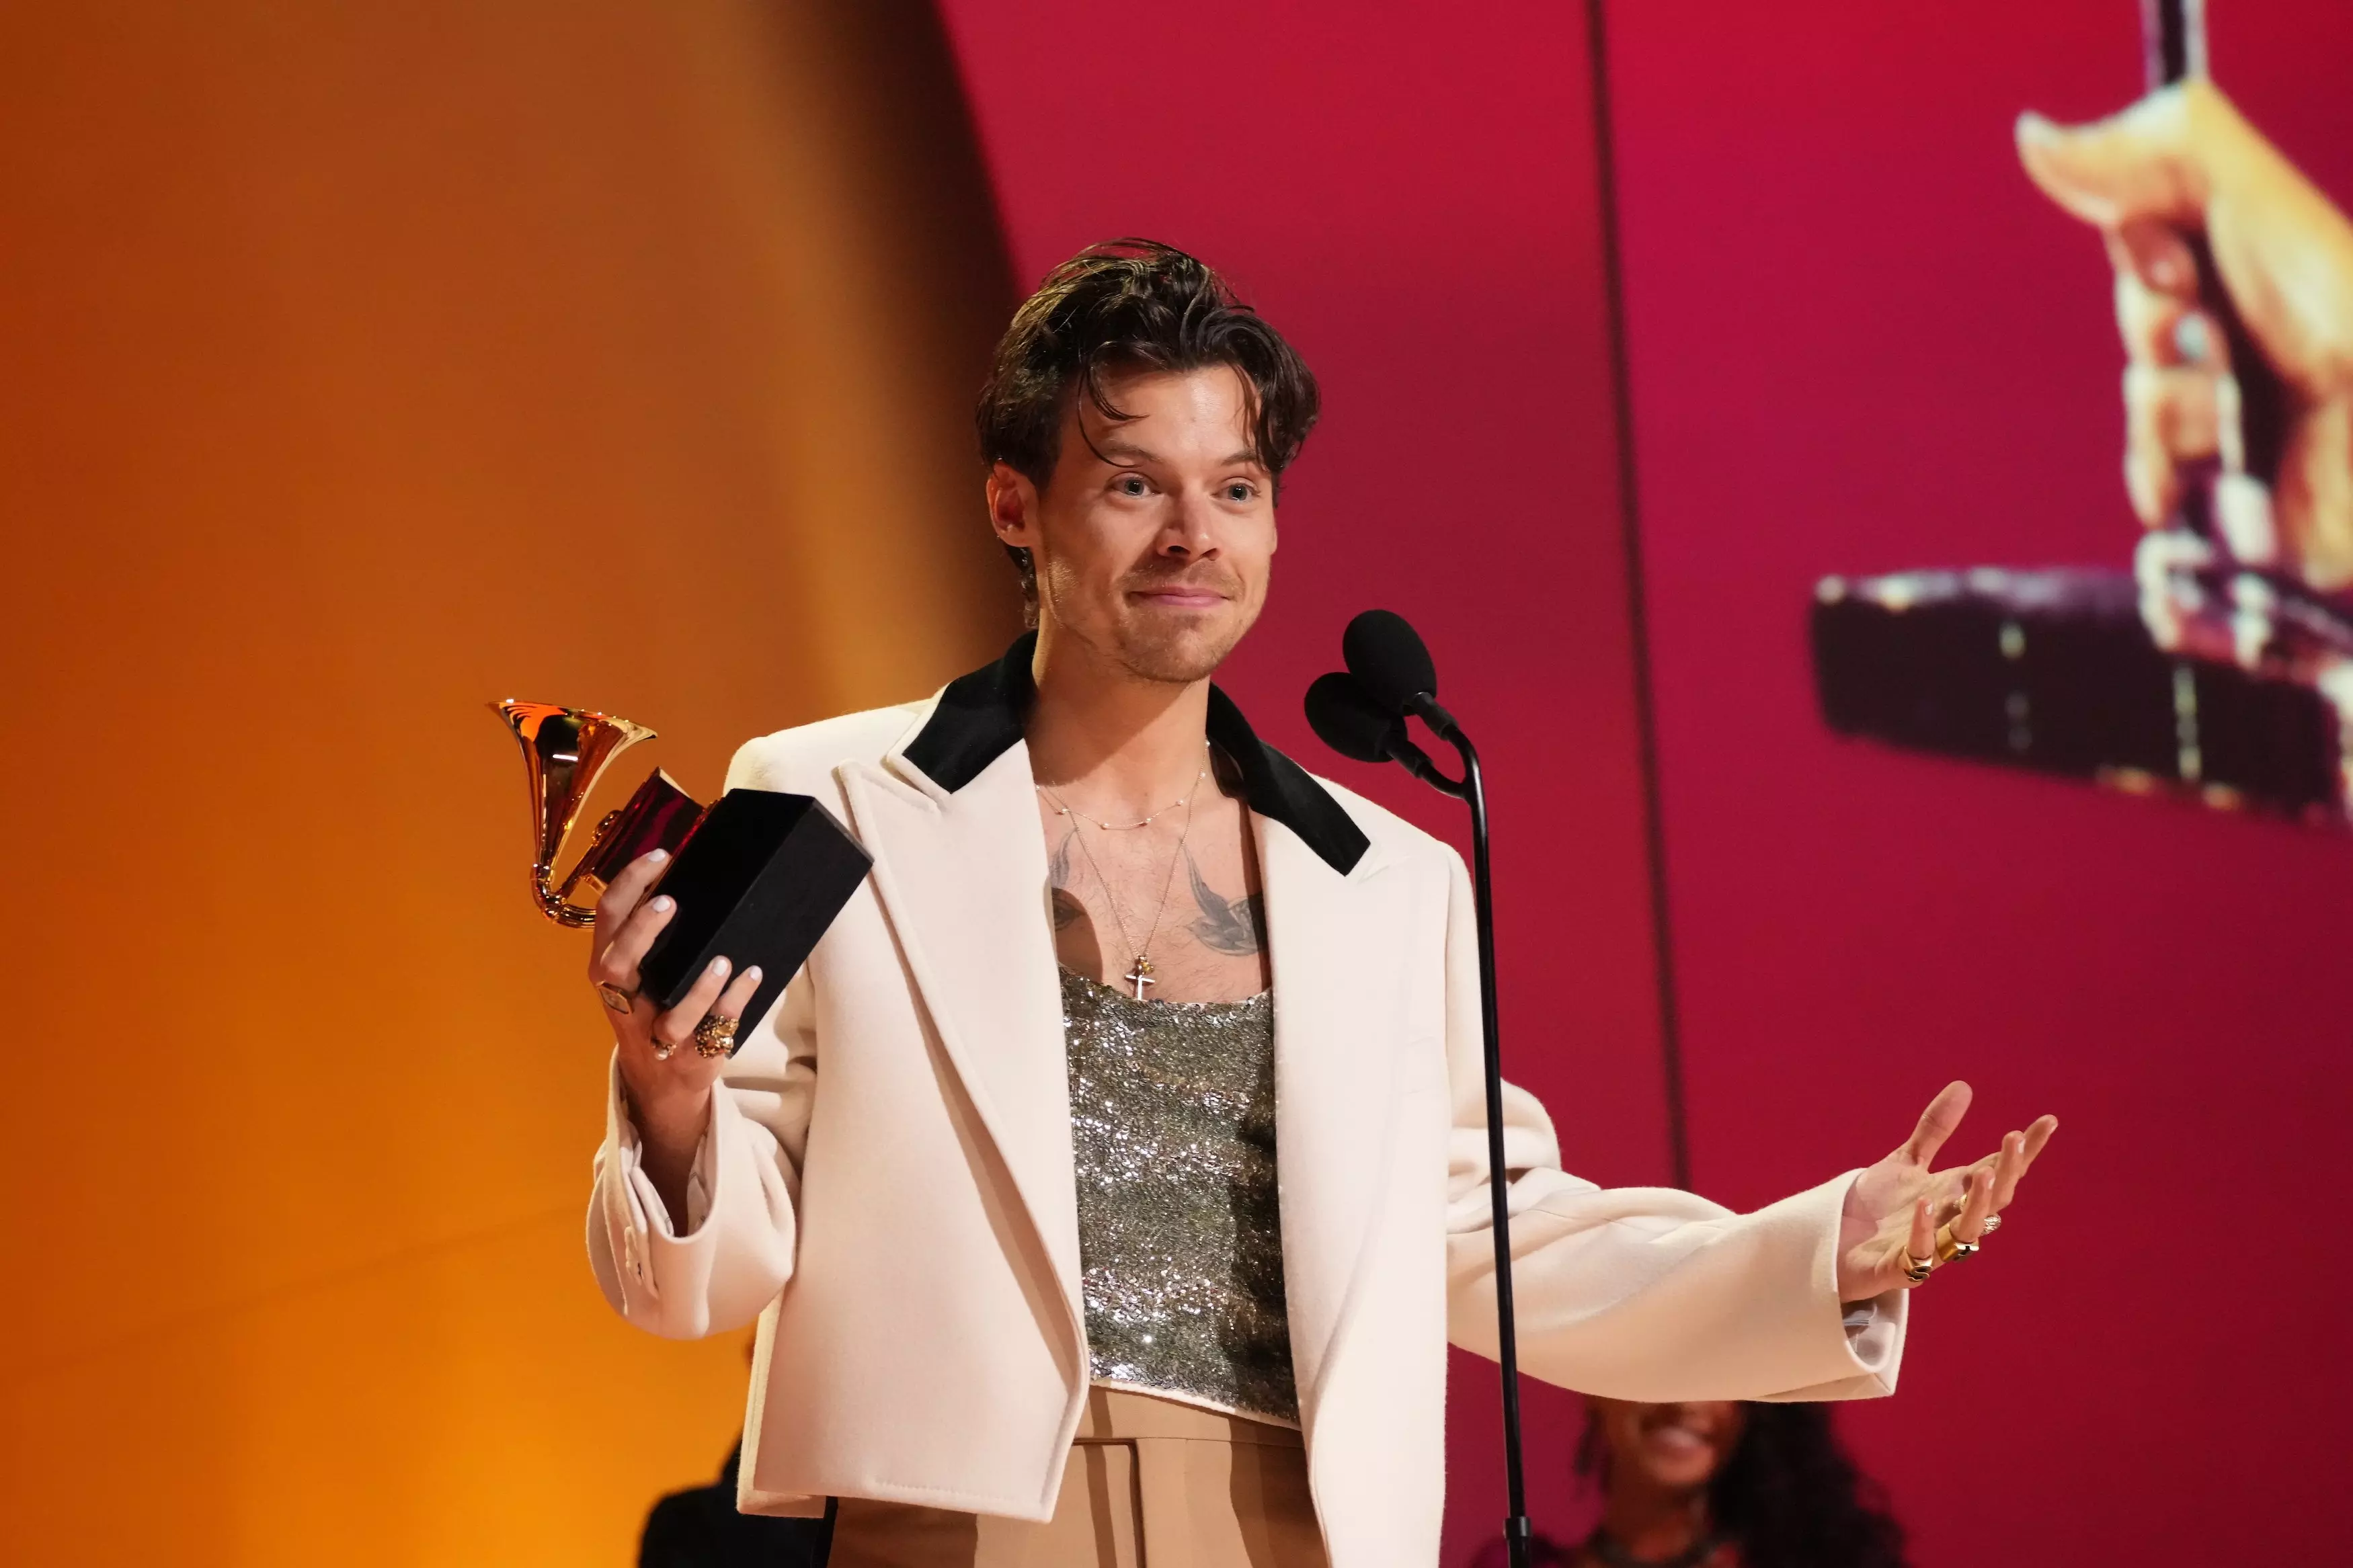 Harry Styles accepting a GRAMMY Award